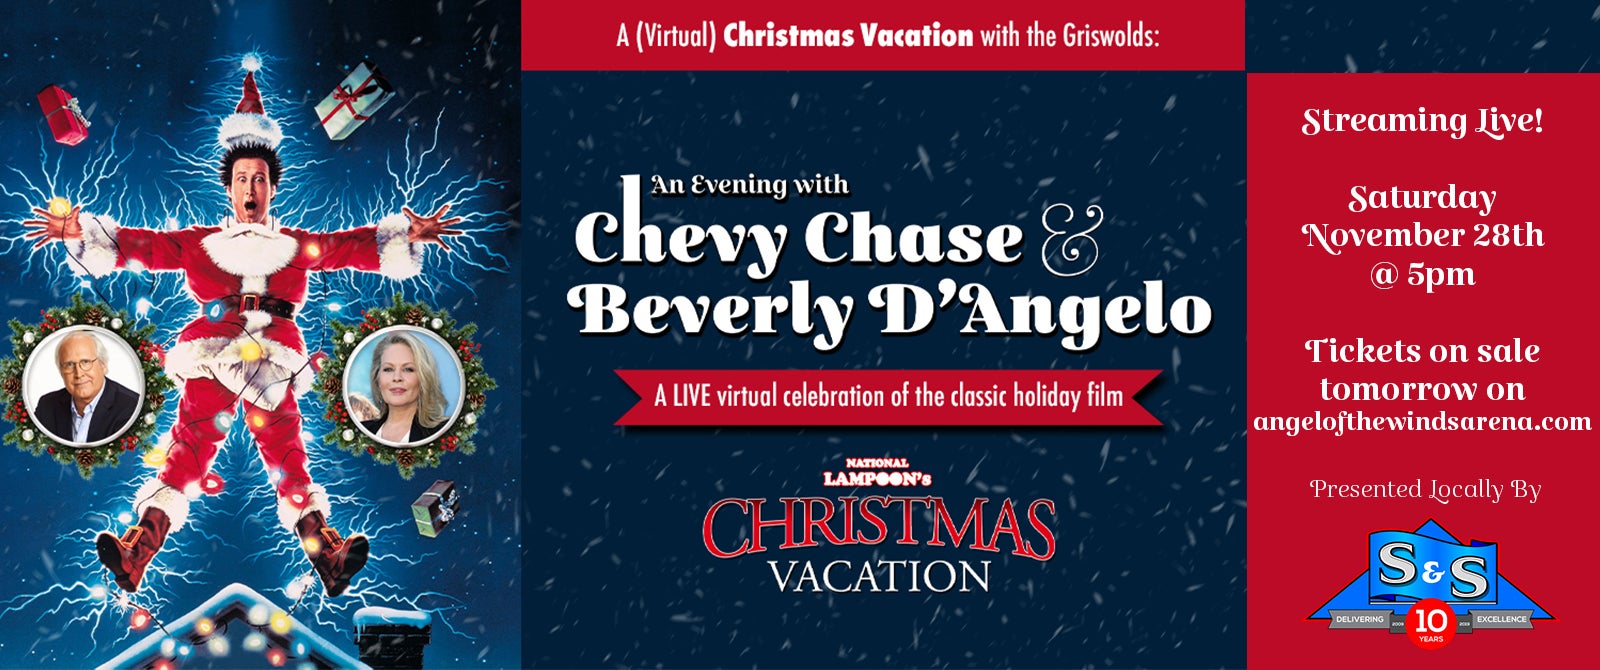 A (Virtual) Christmas Vacation with the Griswold's: An Evening with Chevy Chase and Beverly D'Angelo